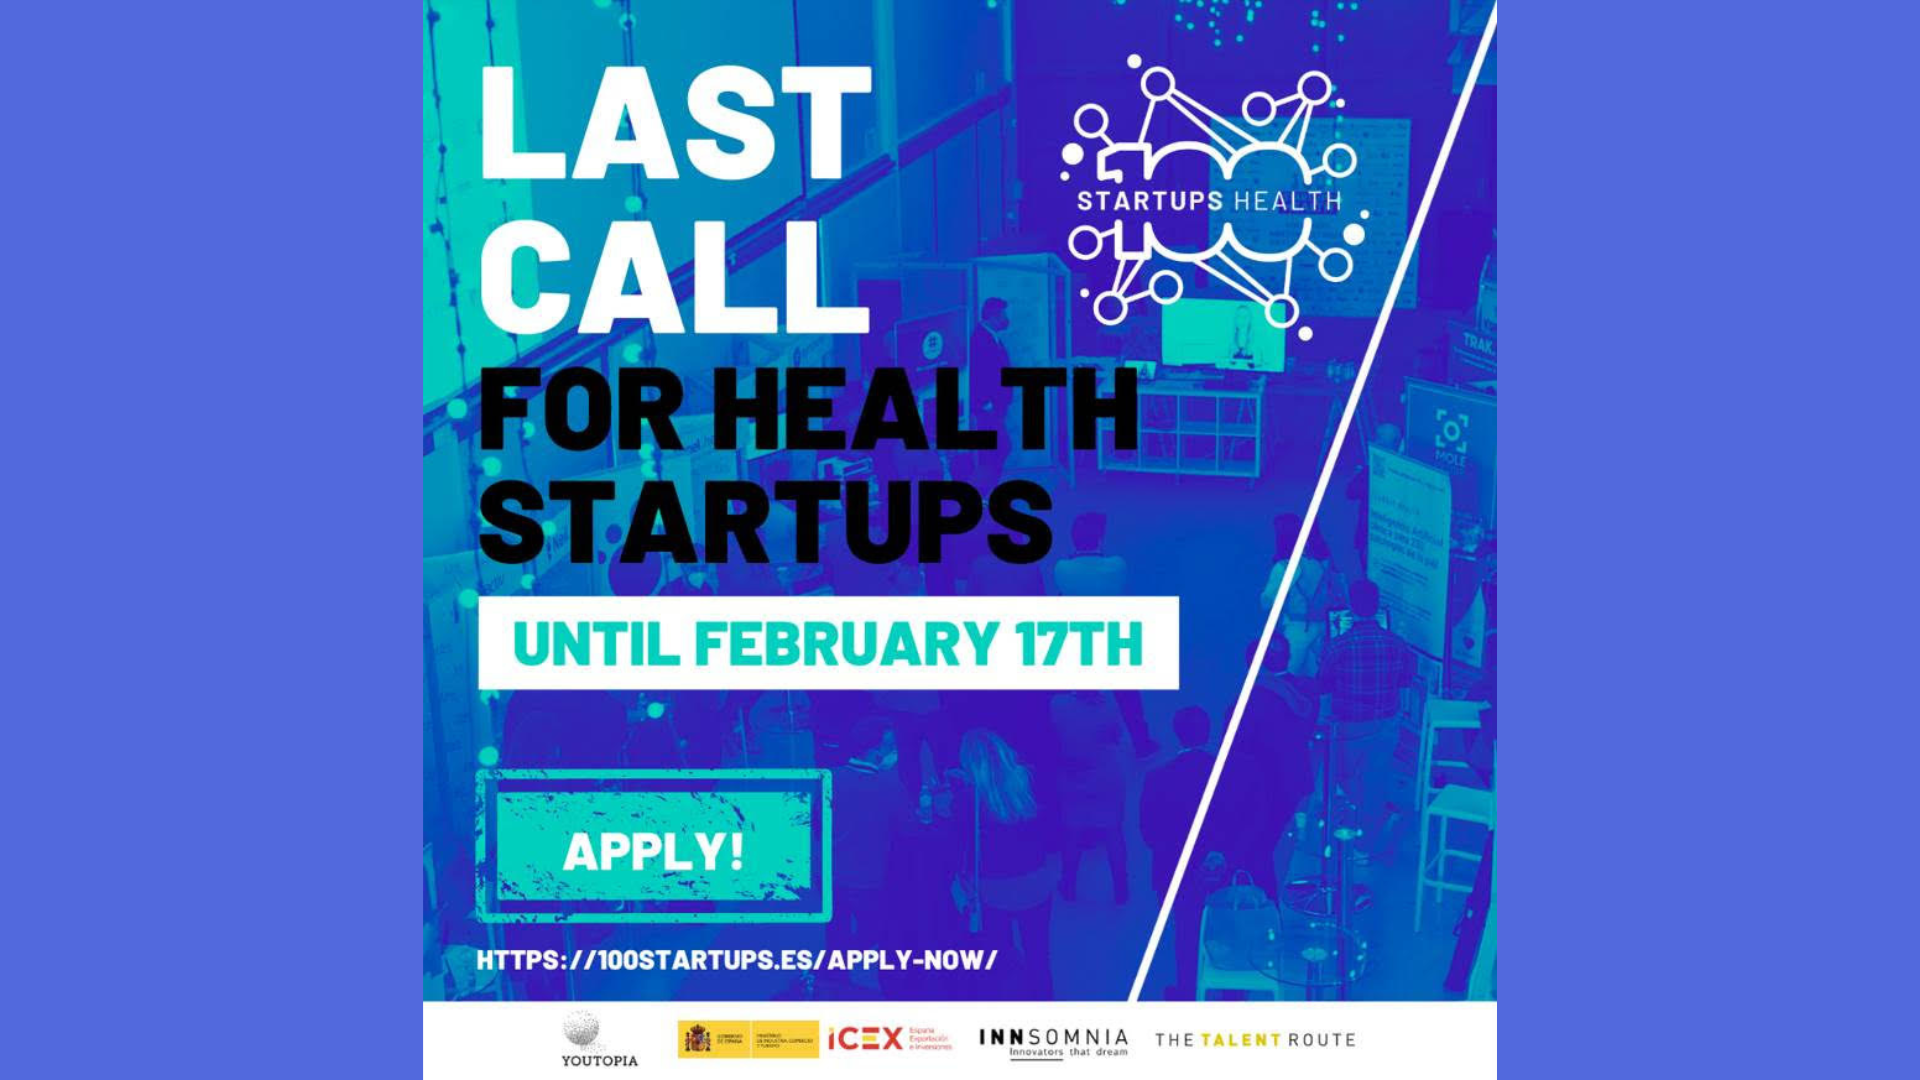 Apply now to become one of the top 100 eHealth startups